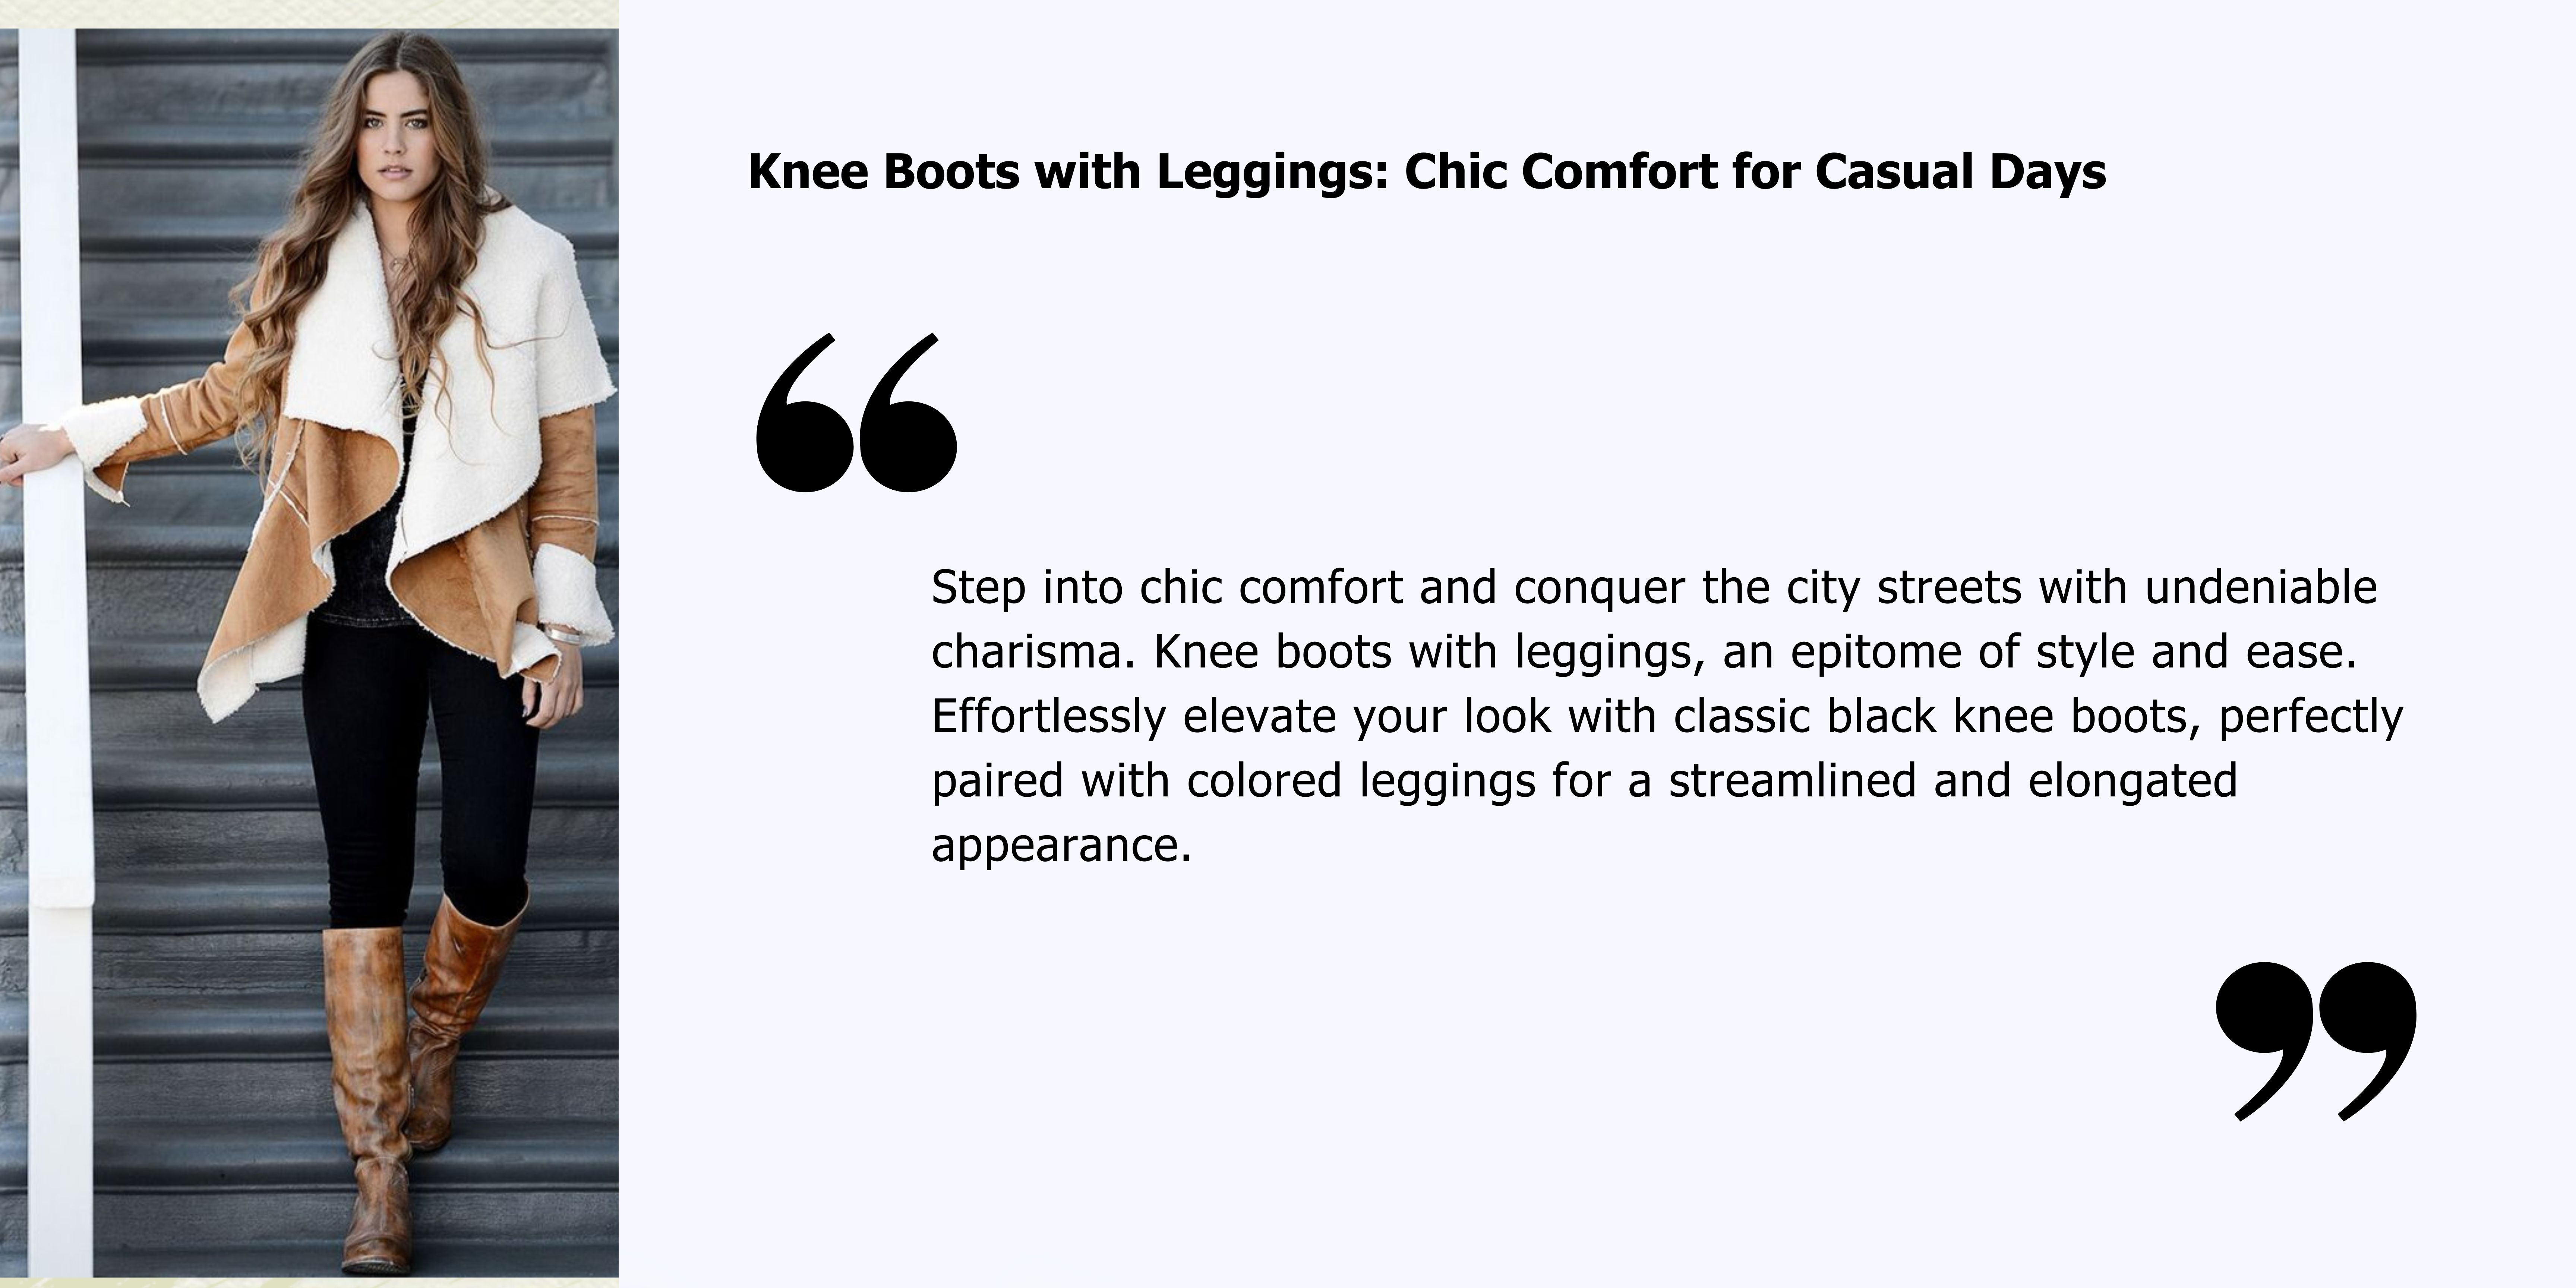 Knee Boots with Leggings: Chic Comfort for Casual Days 